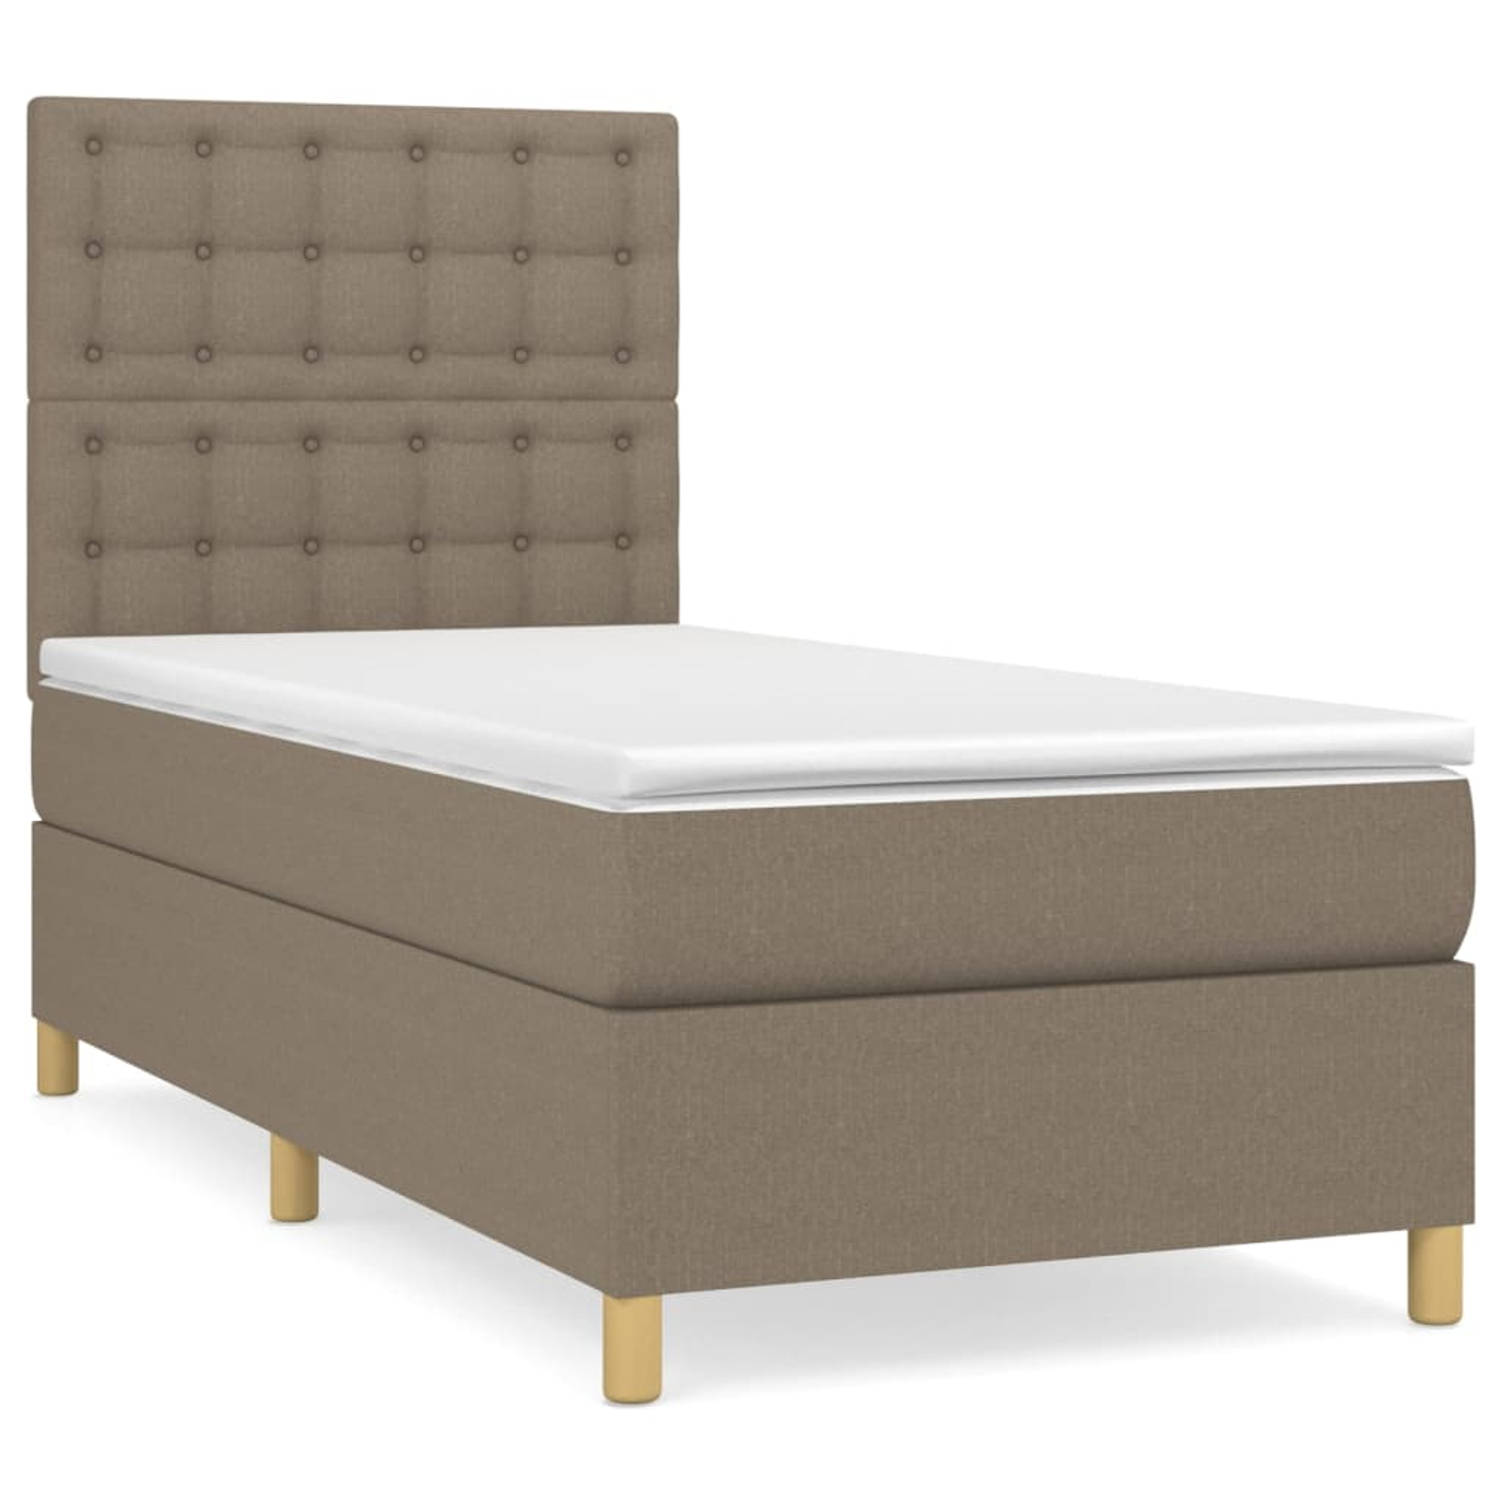 The Living Store Boxspringbed - Taupe - 203 x 100 x 118/128 cm - Pocketvering matras - Middelharde ondersteuning